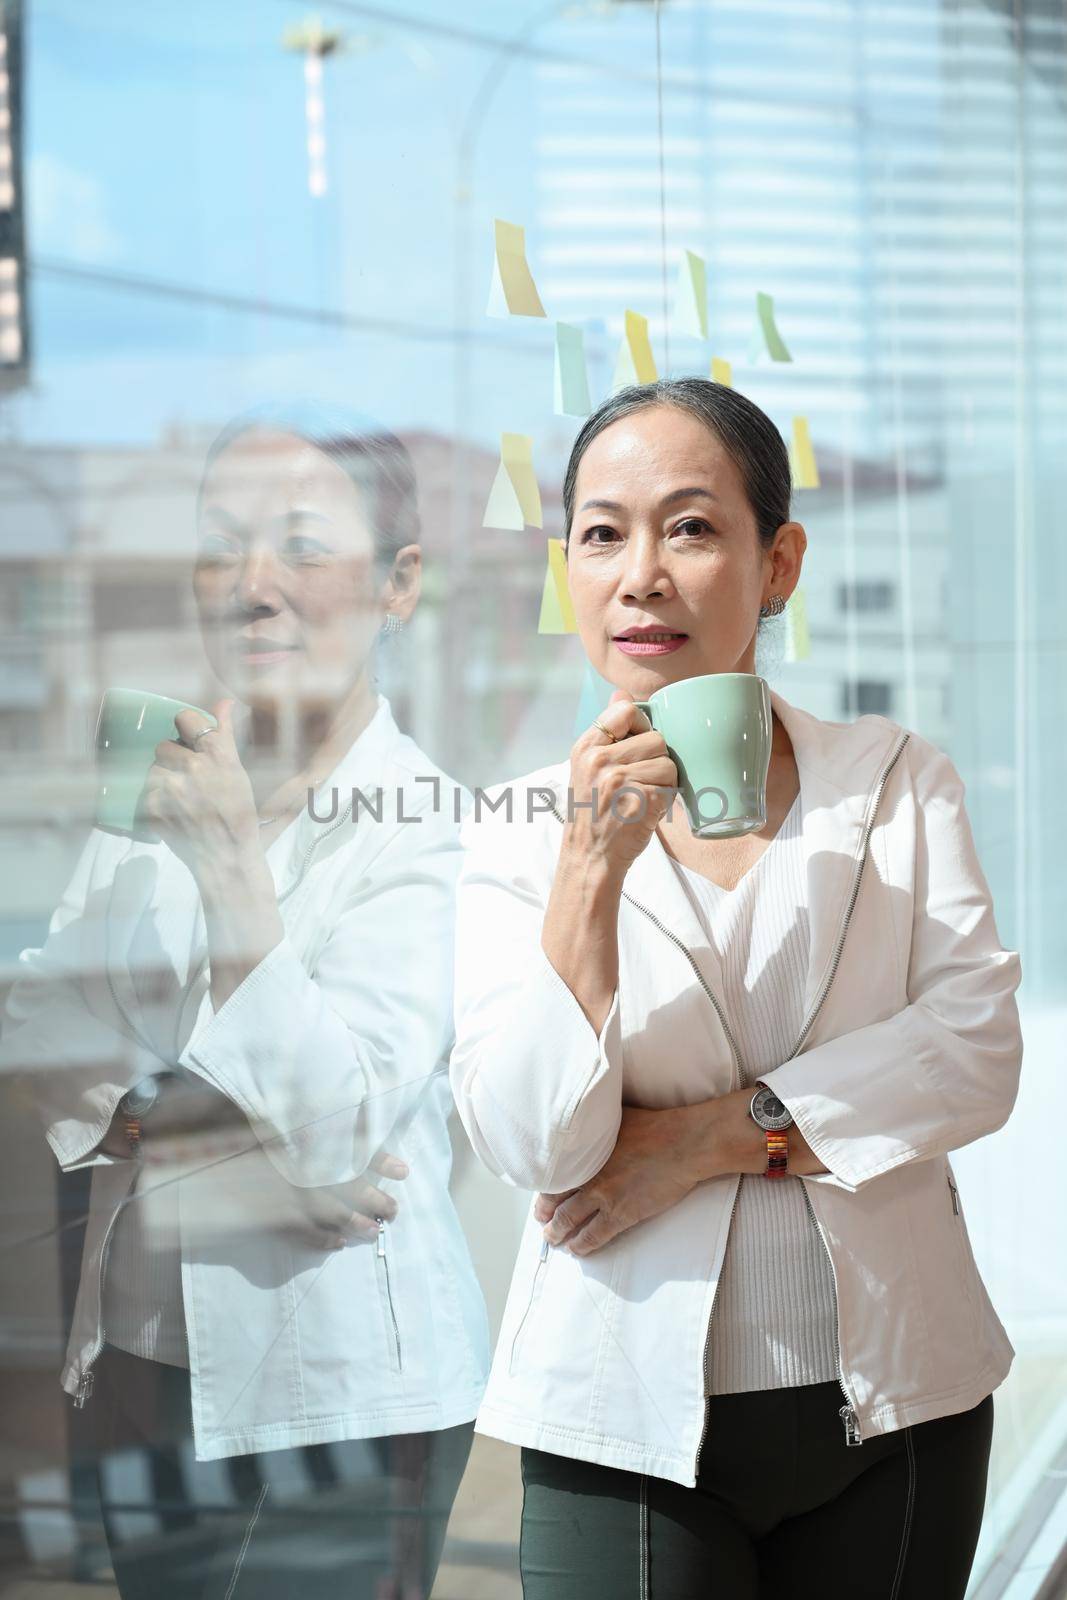 Elegant senior female business leader holding coffee cup and standing near large window at office with city buildings in background.